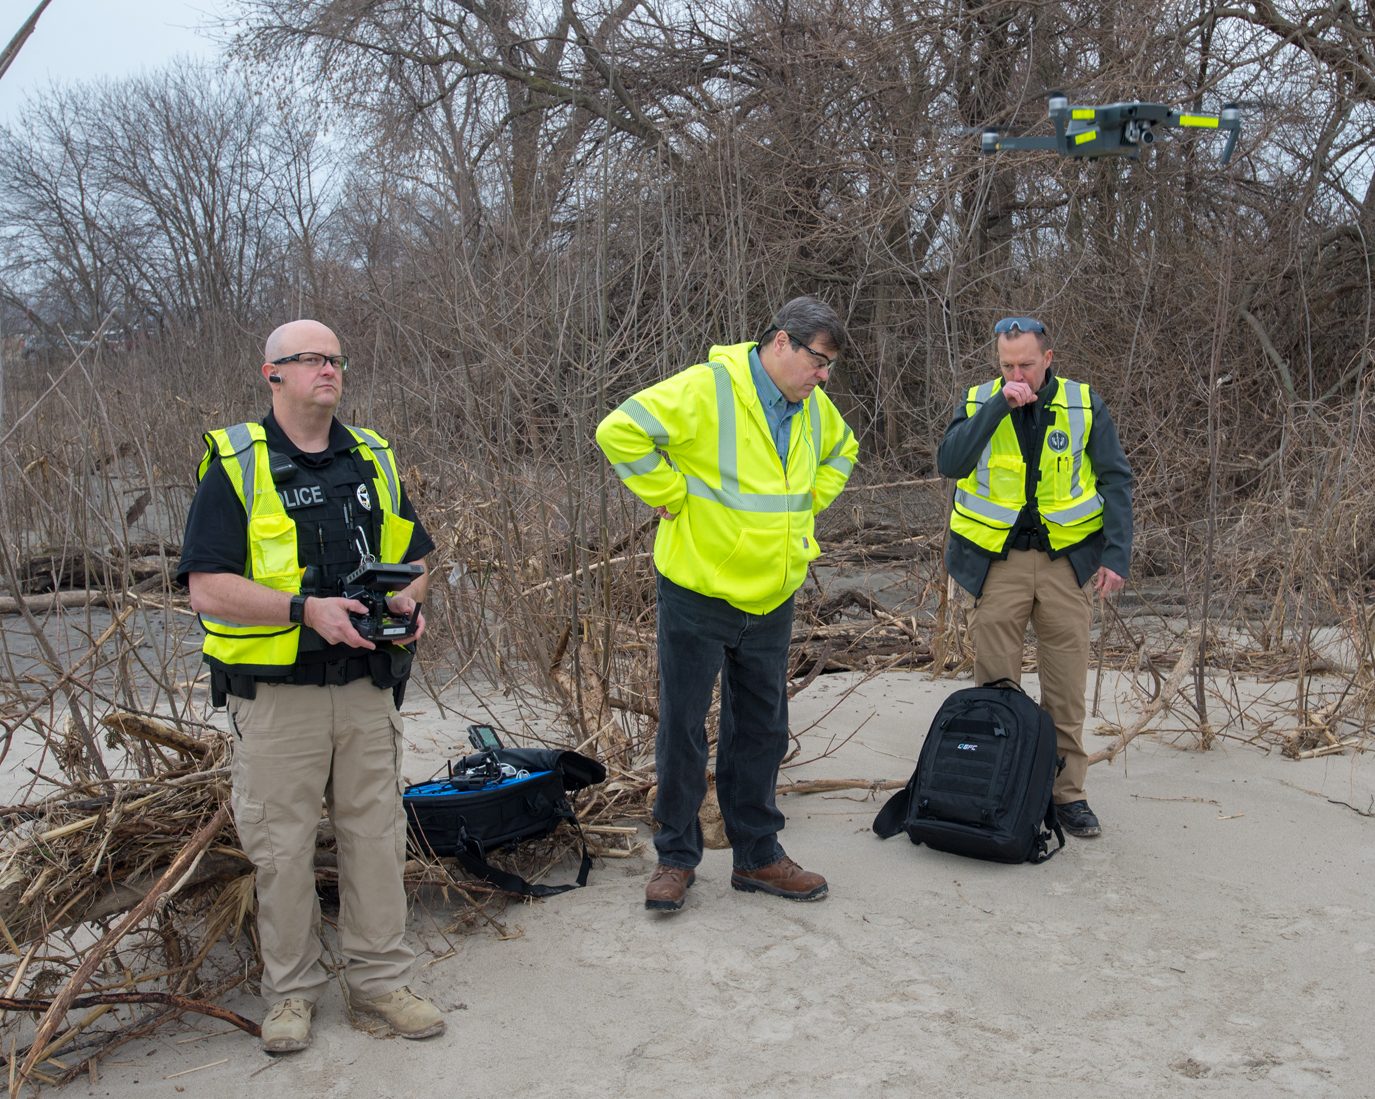 Union Pacific Railroad senior special agent Cayl England left and UP senior manager of public safety Larry Wenko use drones in order to survey and document damage